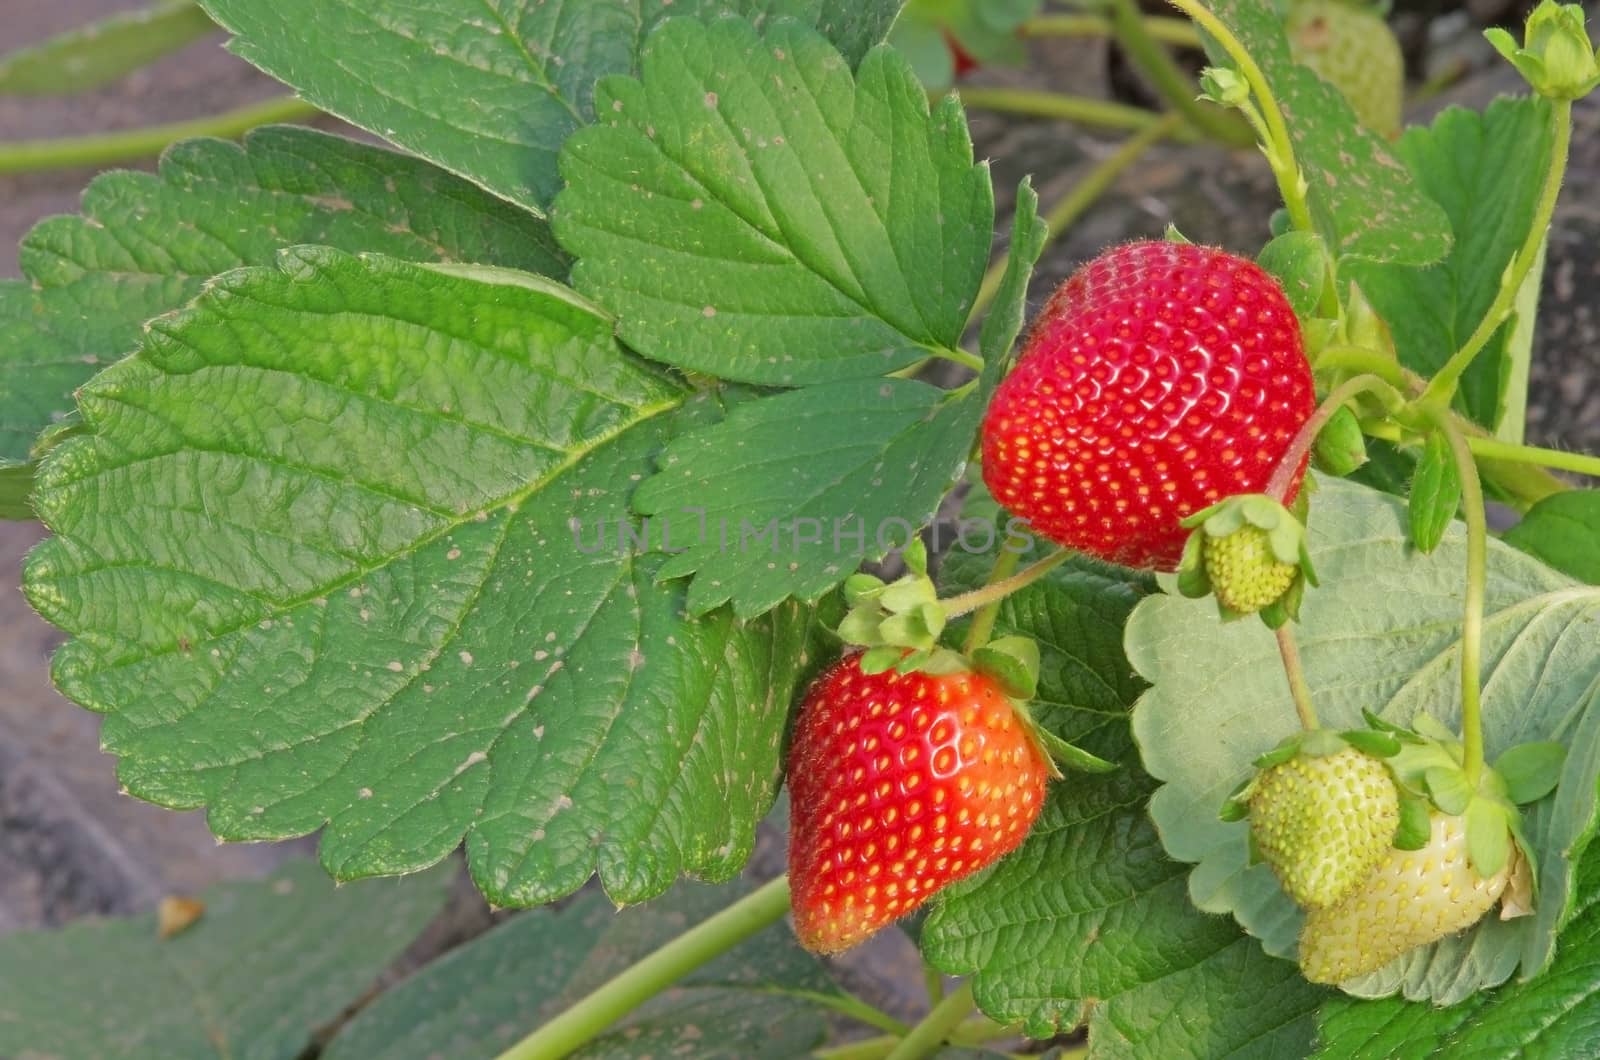 Strawberry plant with green and red fruits